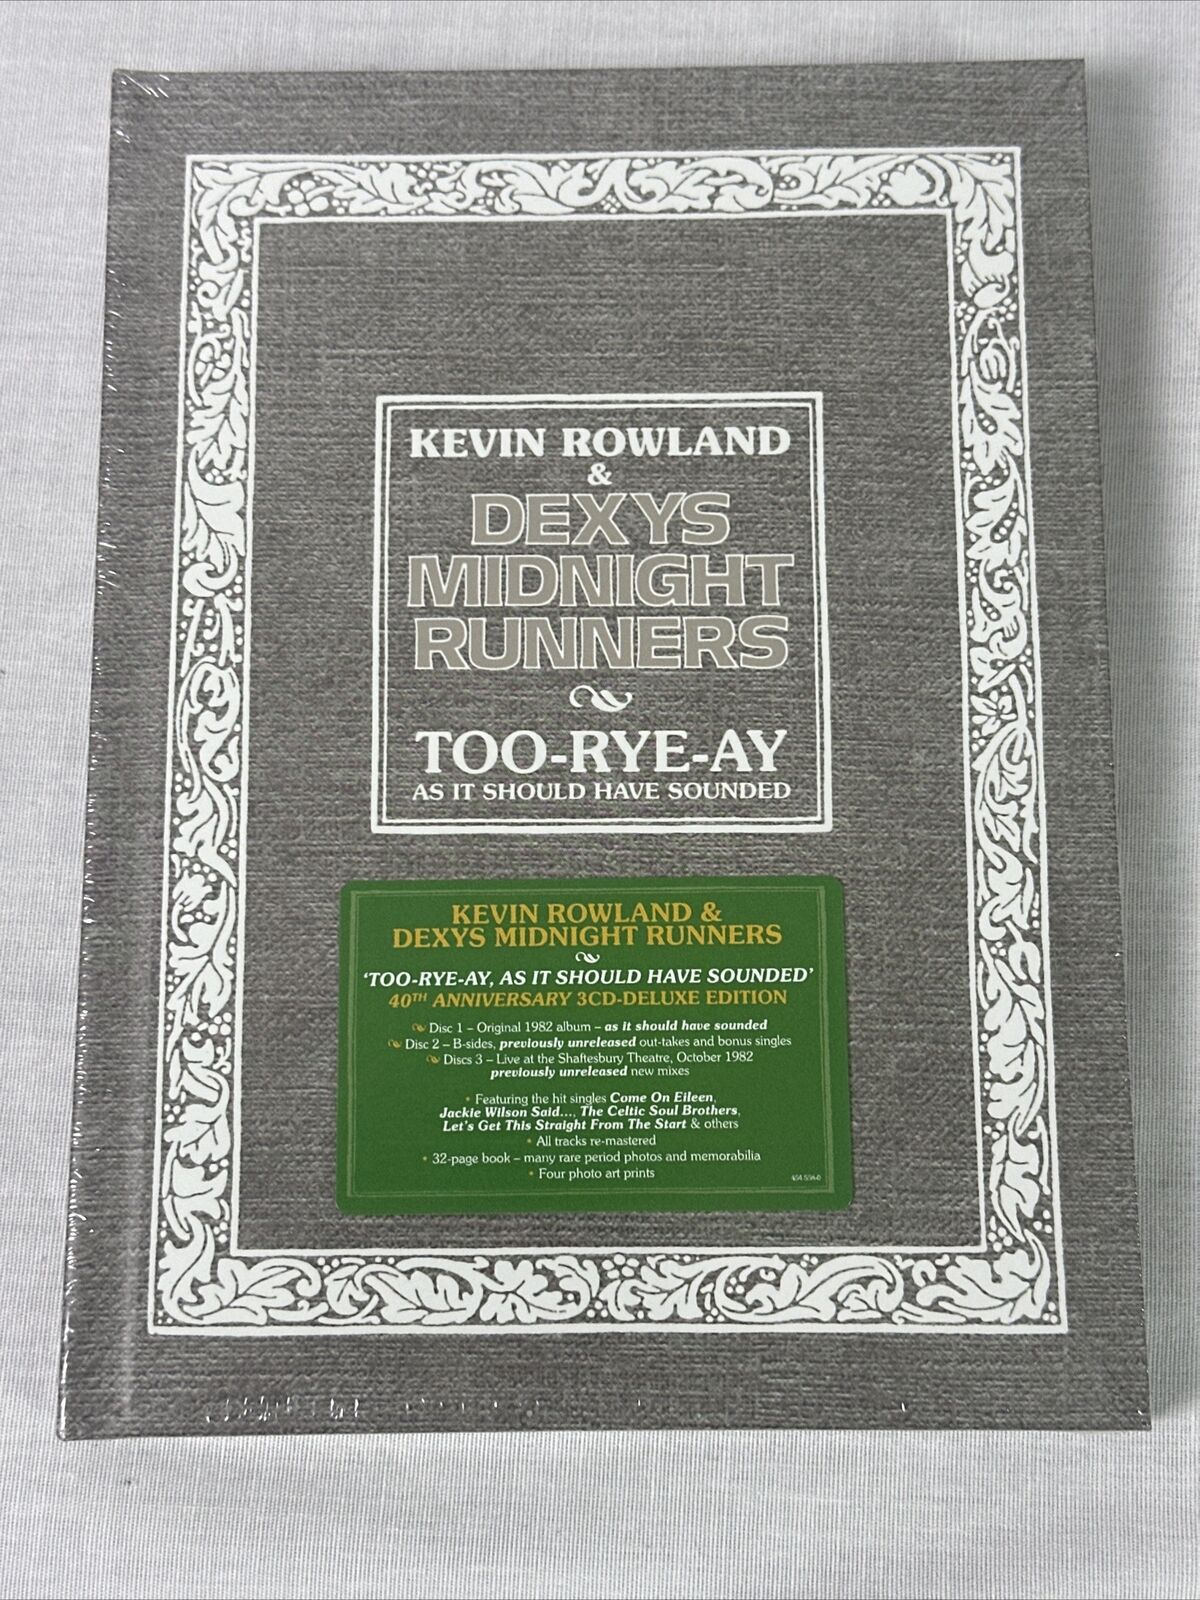 Too-Rye-Ay by Kevin Rowland and Dexys Midnight Runners 3 CD Deluxe Edition 2022